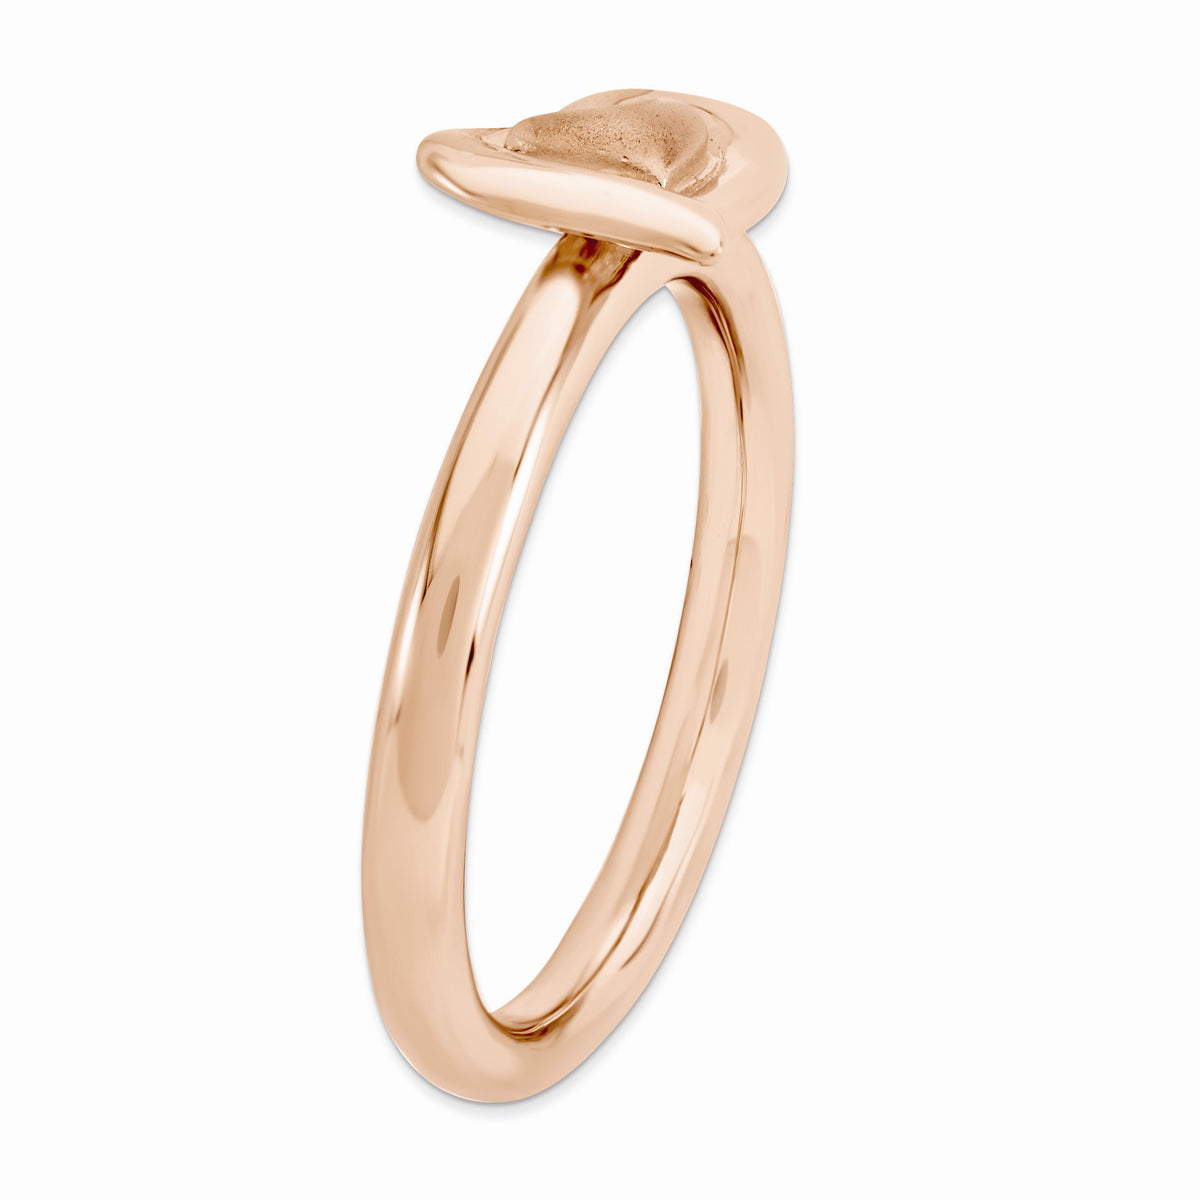 Alternate view of the Rose Gold Tone Plated Sterling Silver Stackable 9mm Heart Ring by The Black Bow Jewelry Co.